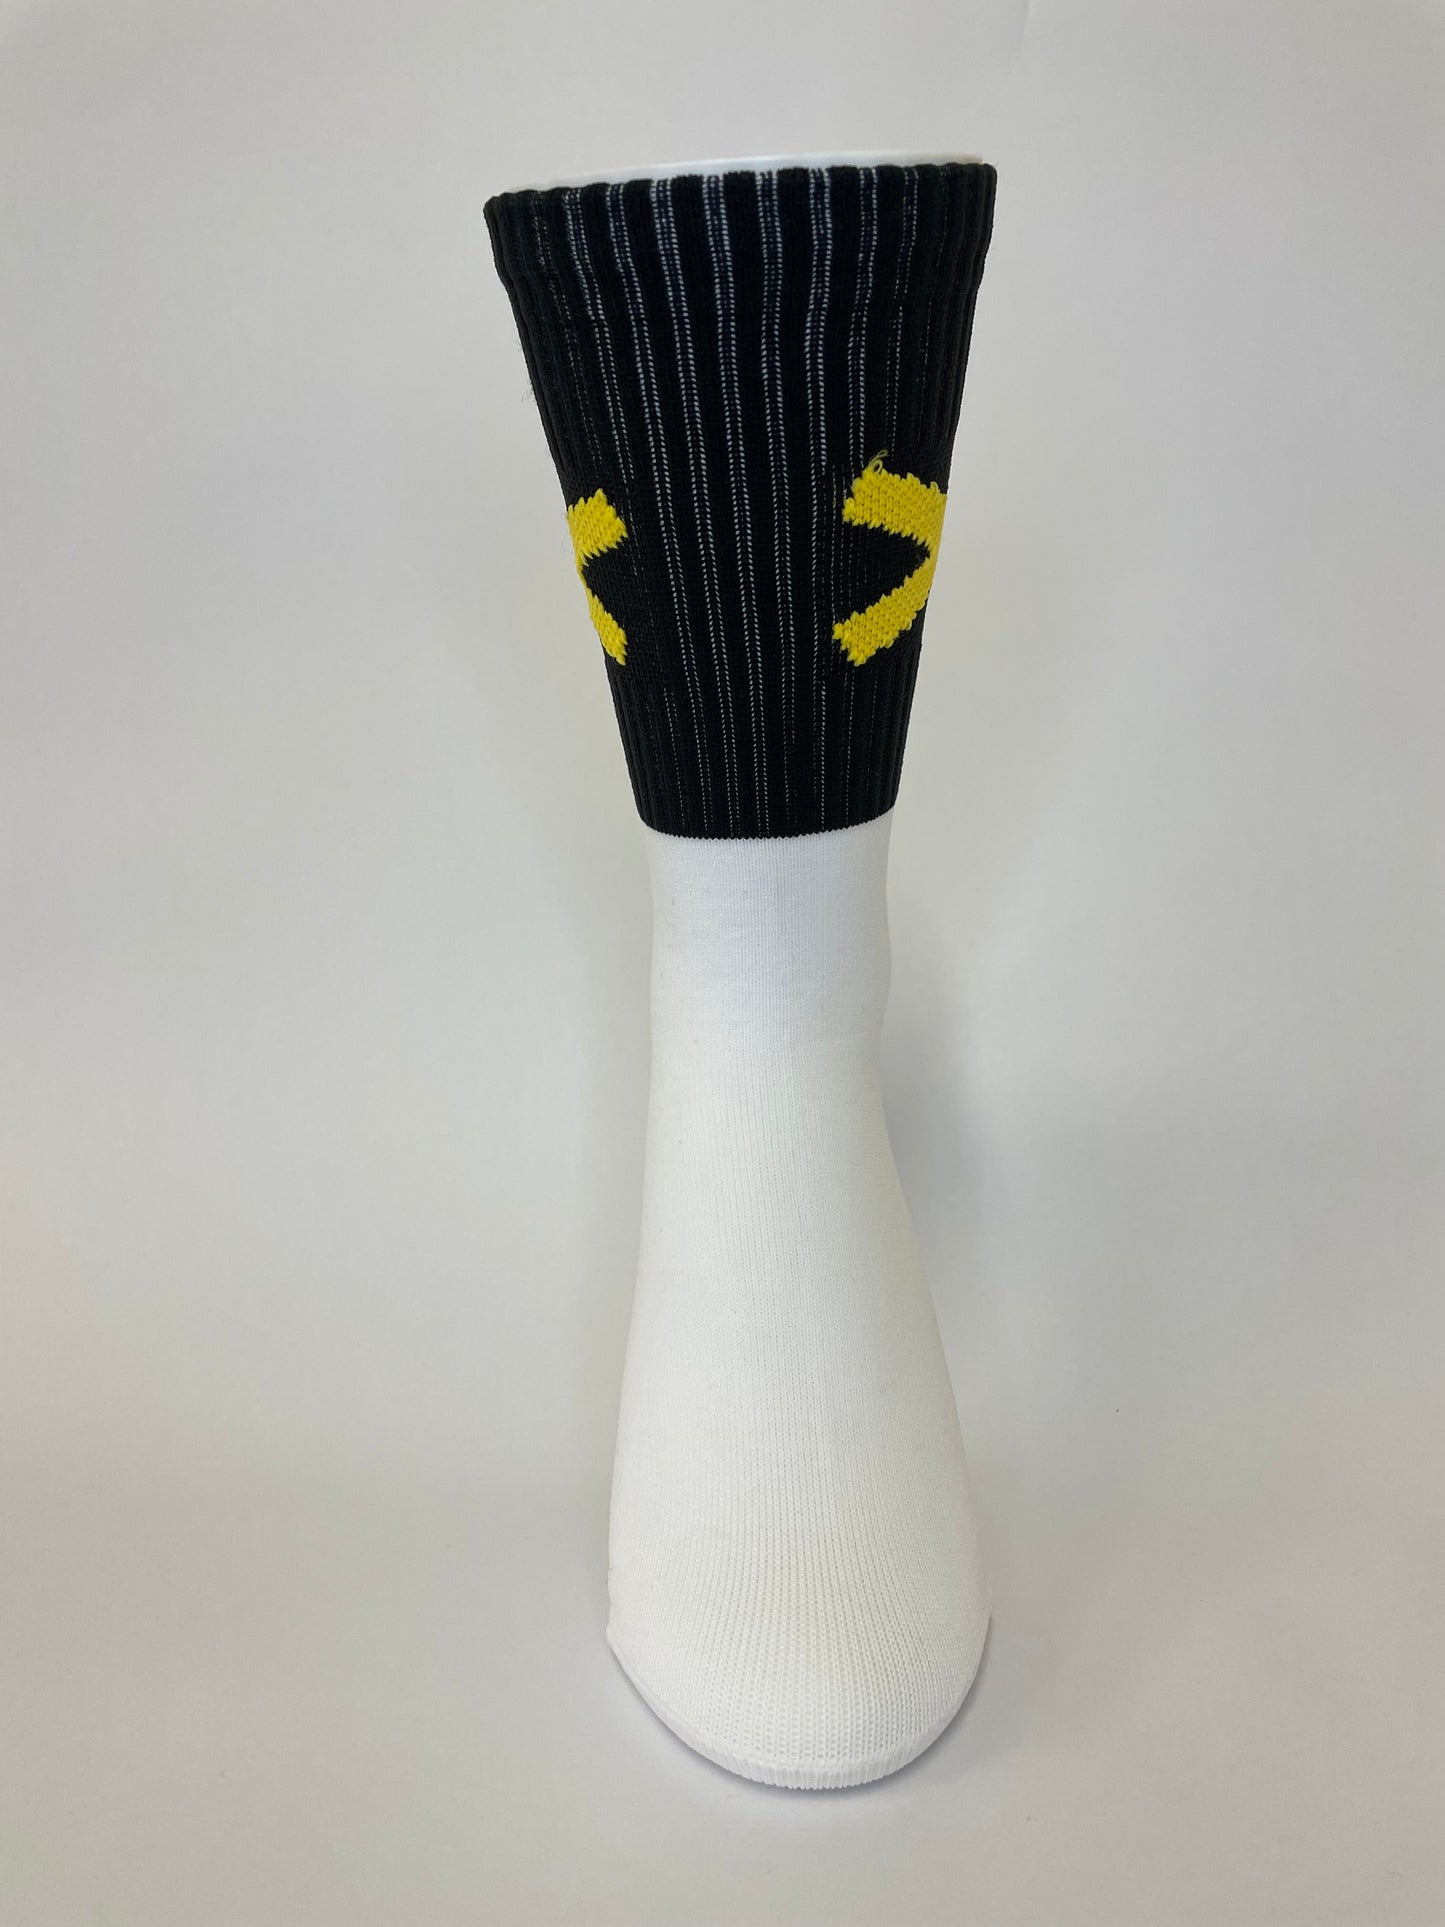 New and Improved X Gaelic Games Sock